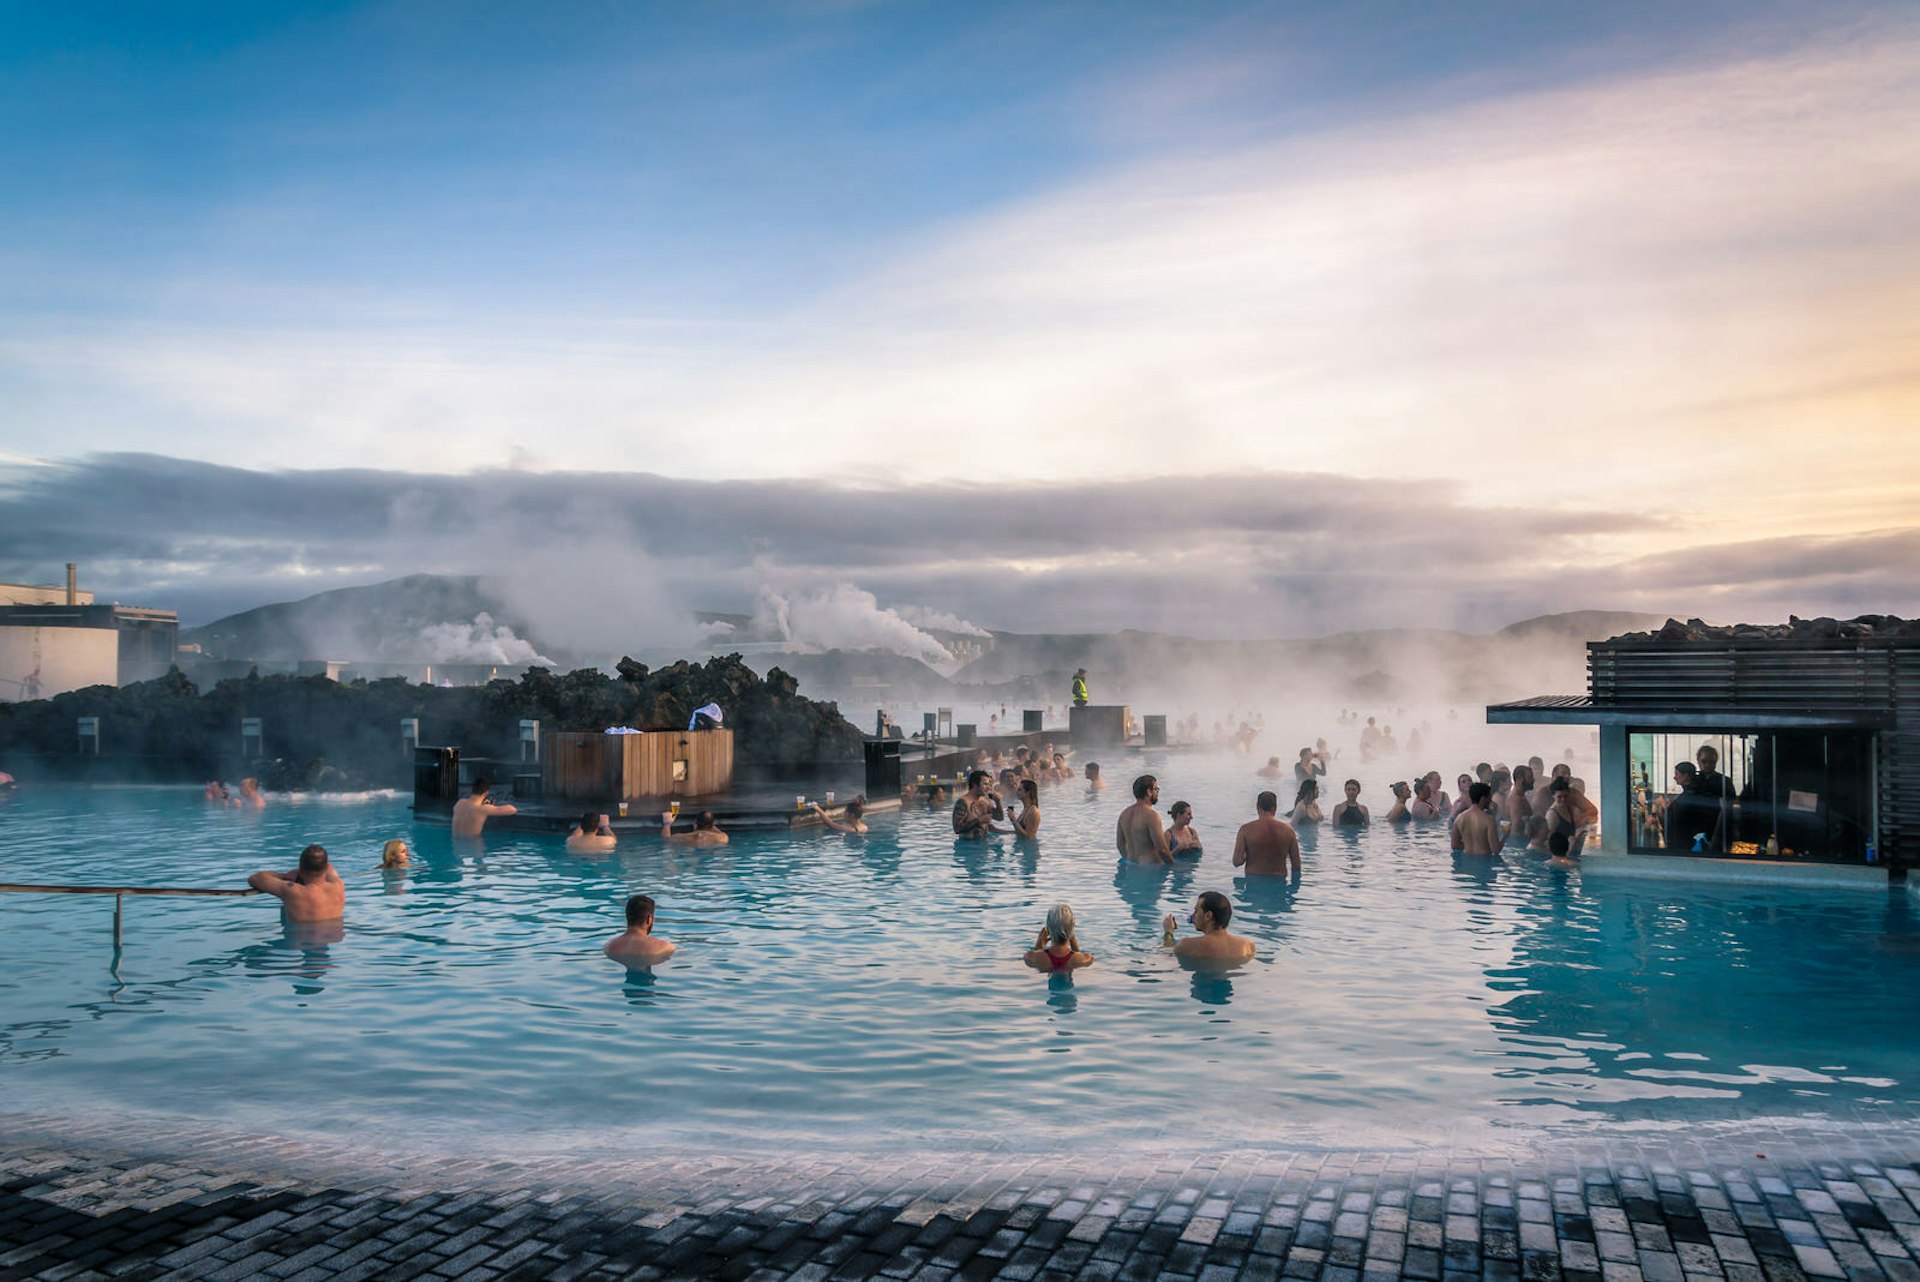 Iceland's Blue Lagoon, a geothermal spa, pictured with many people surrounding the swim-up bar